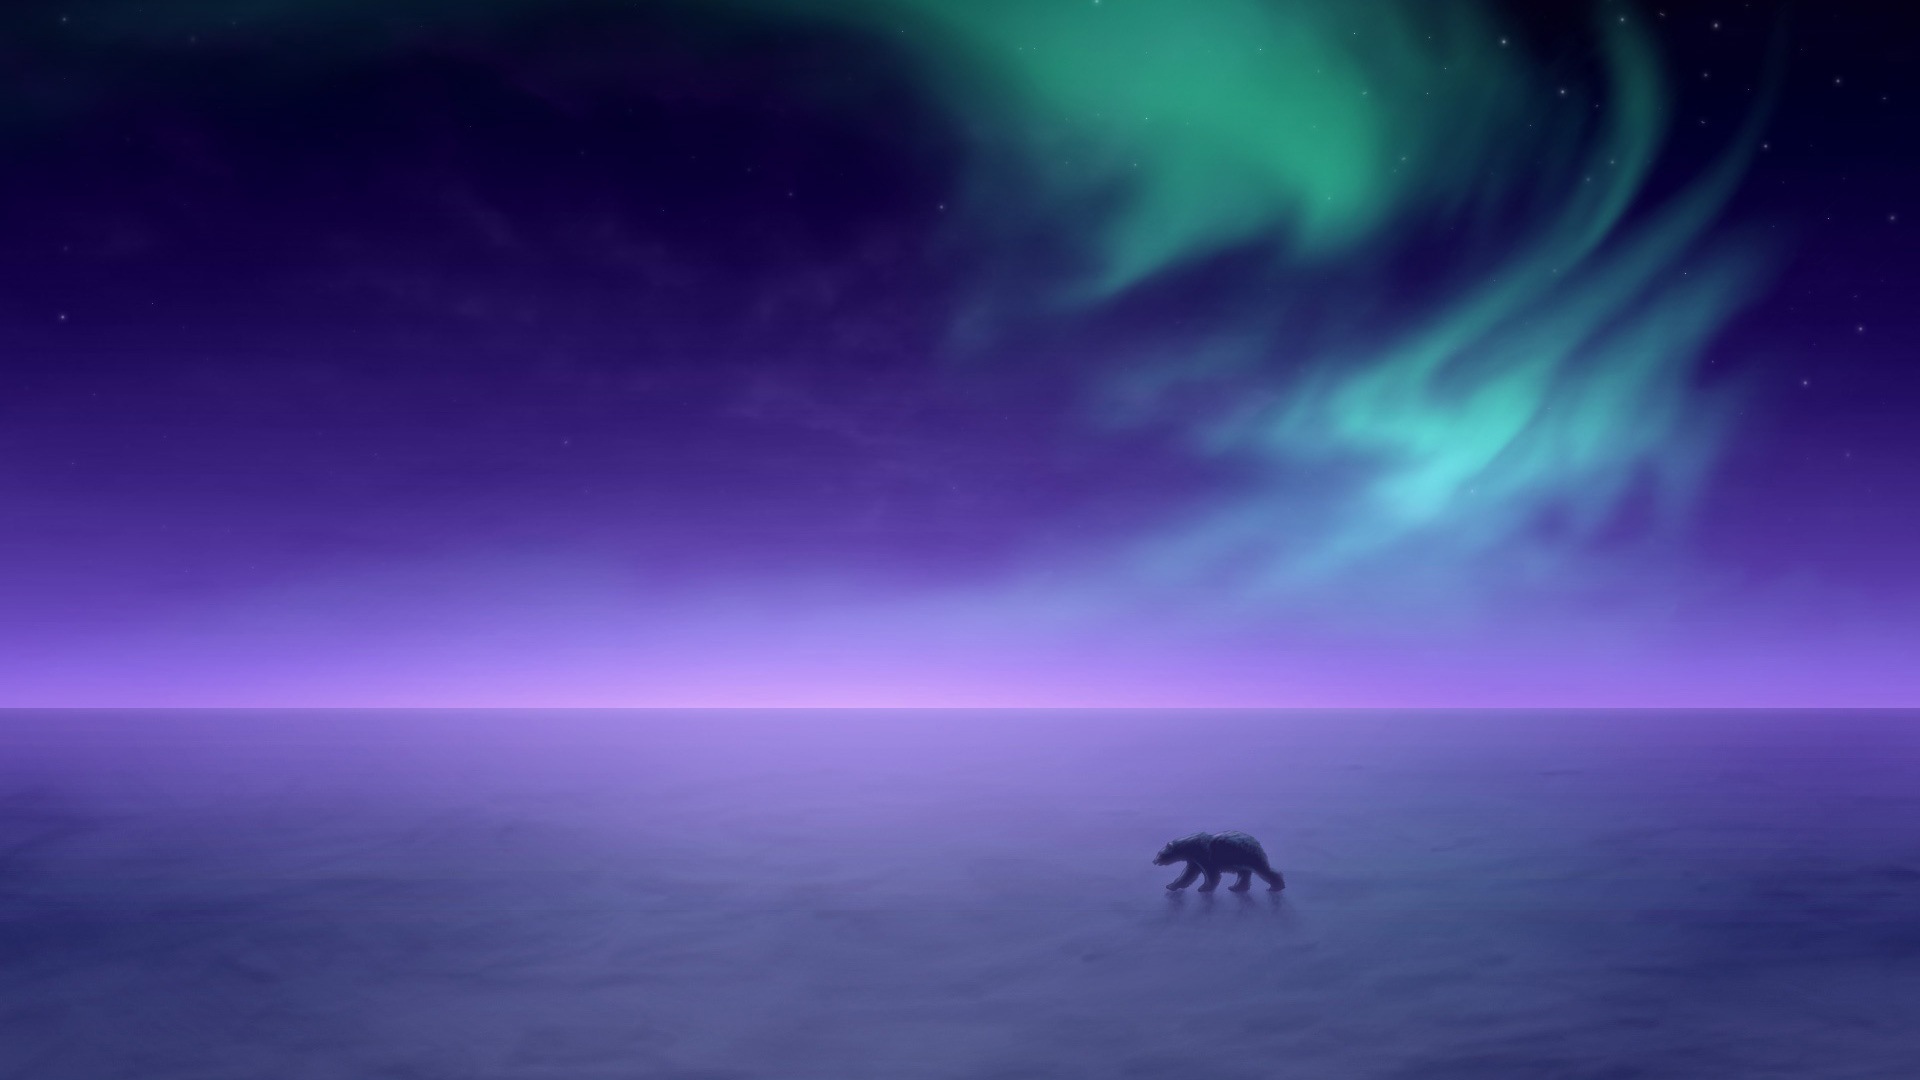 Natural wonders of the Northern Lights HD Wallpaper (2) #21 - 1920x1080